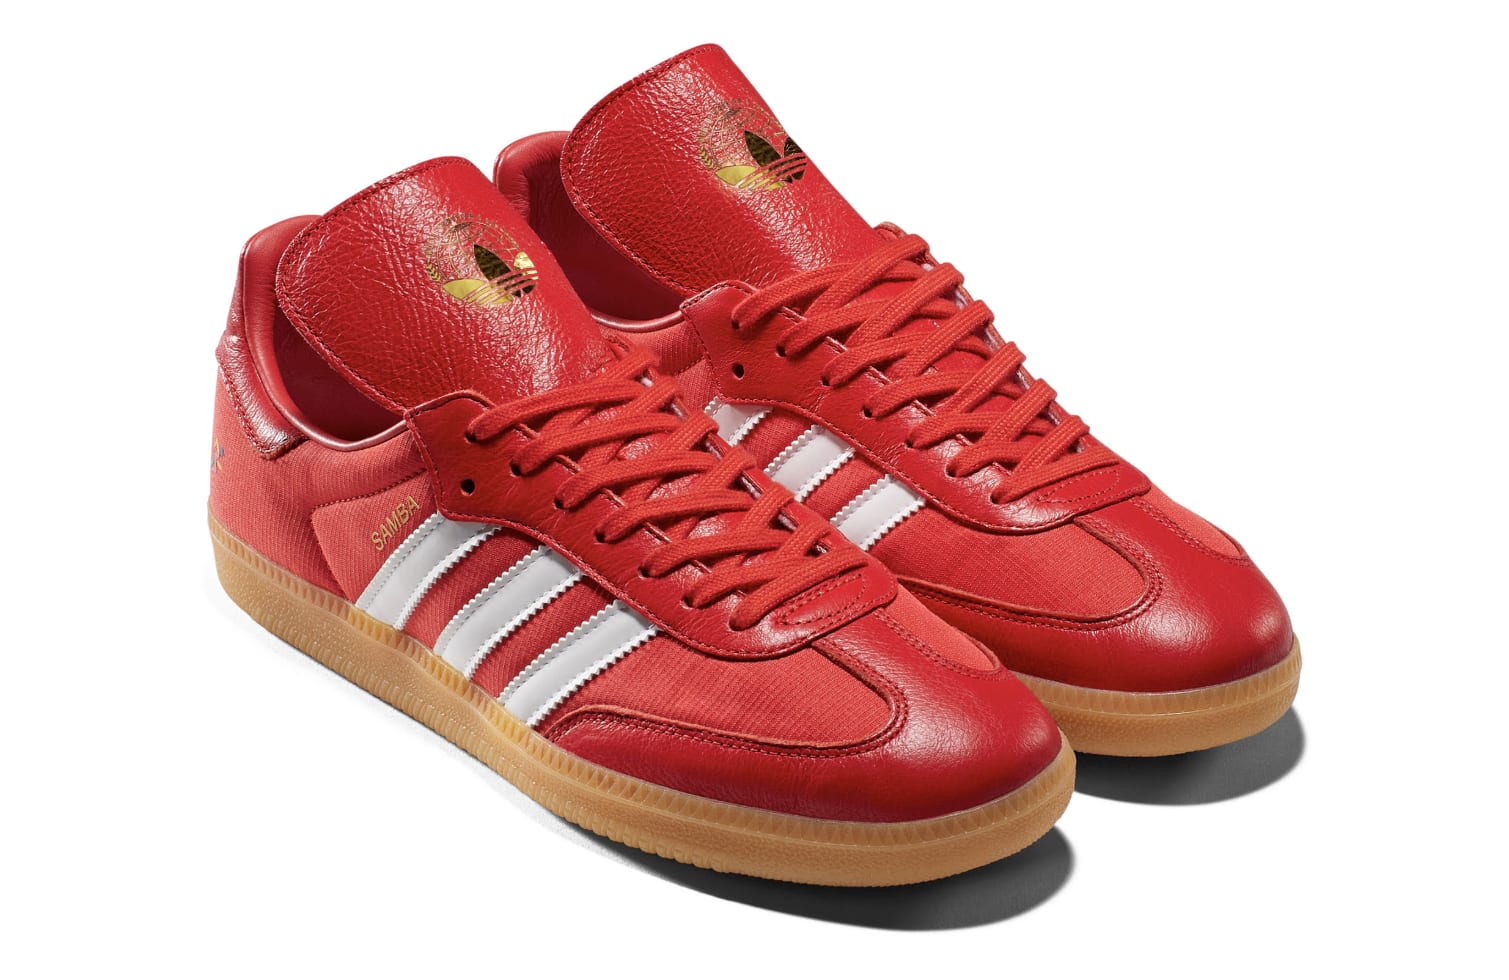 Oyster Holdings Is Another Traveling-Inspired Adidas Collab |